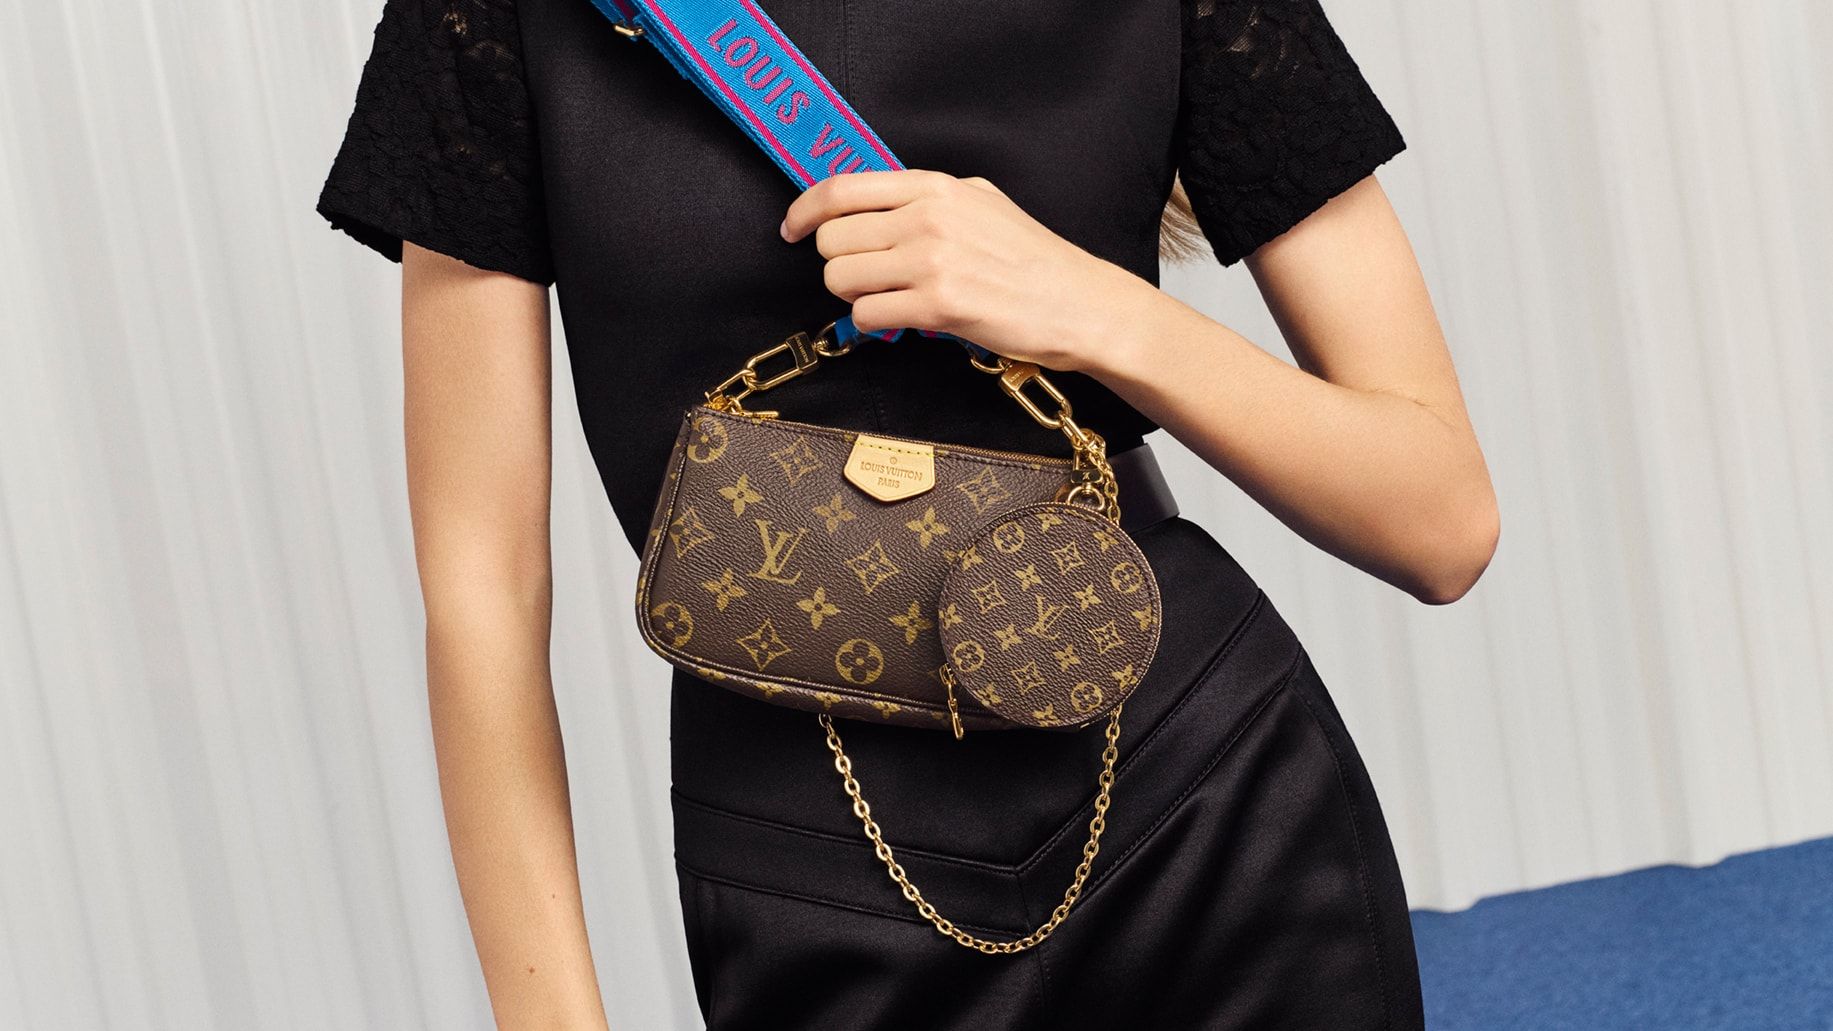 Louis Vuitton’s new bag, a “chilli crab” capsule collection, and more fashion news